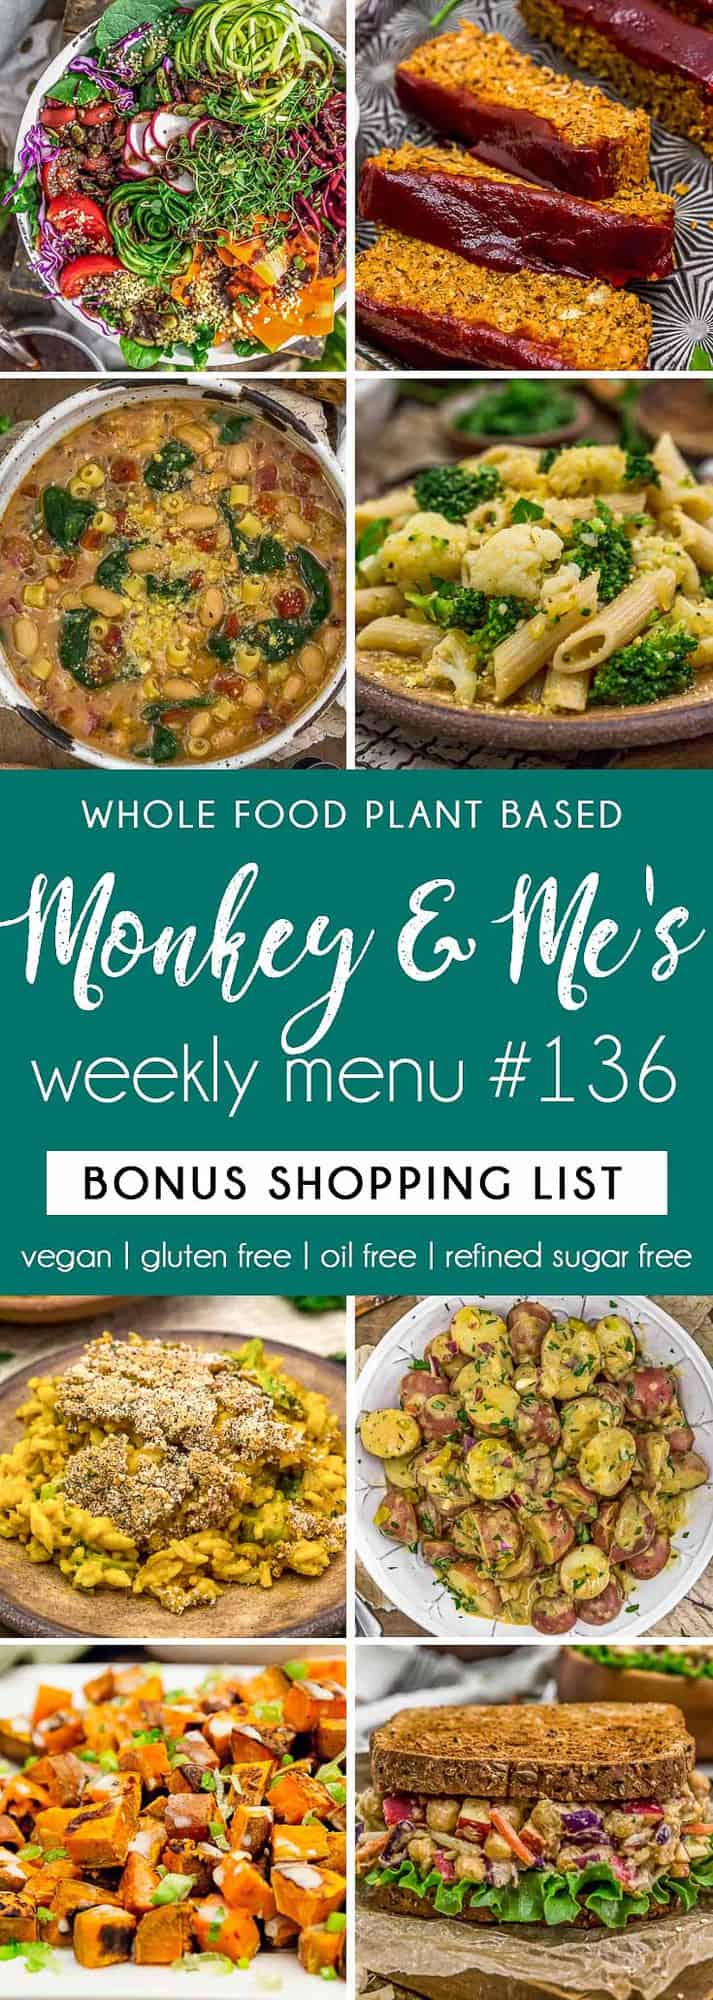 Monkey and Me's Menu 136 featuring 8 recipes